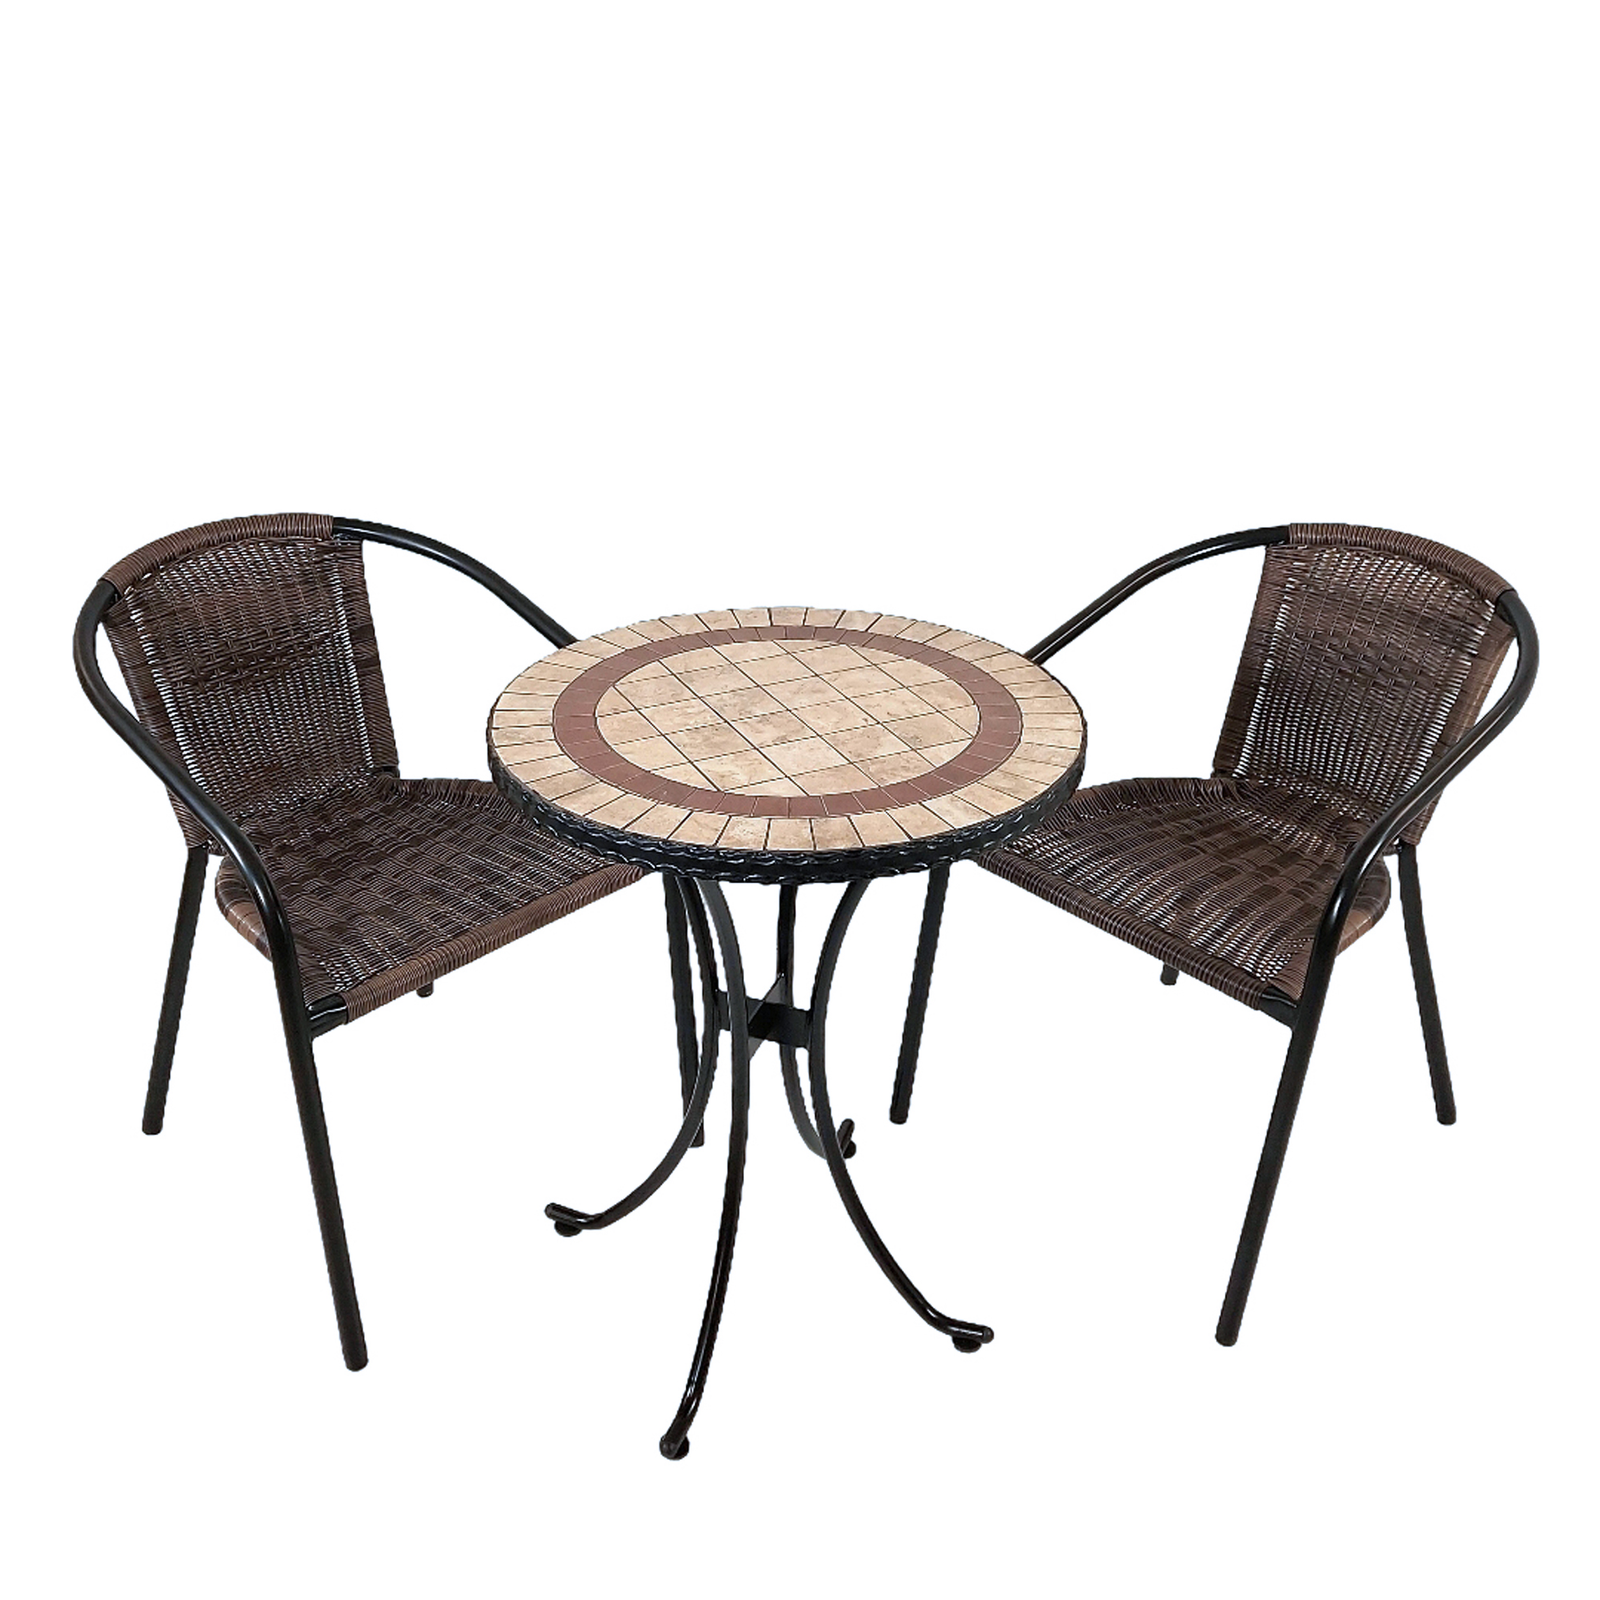 Exclusive Garden Henley 60 cm Round Table with 2 San Remo Chairs Garden Set Dining Set Dining Sets Exclusive Garden   